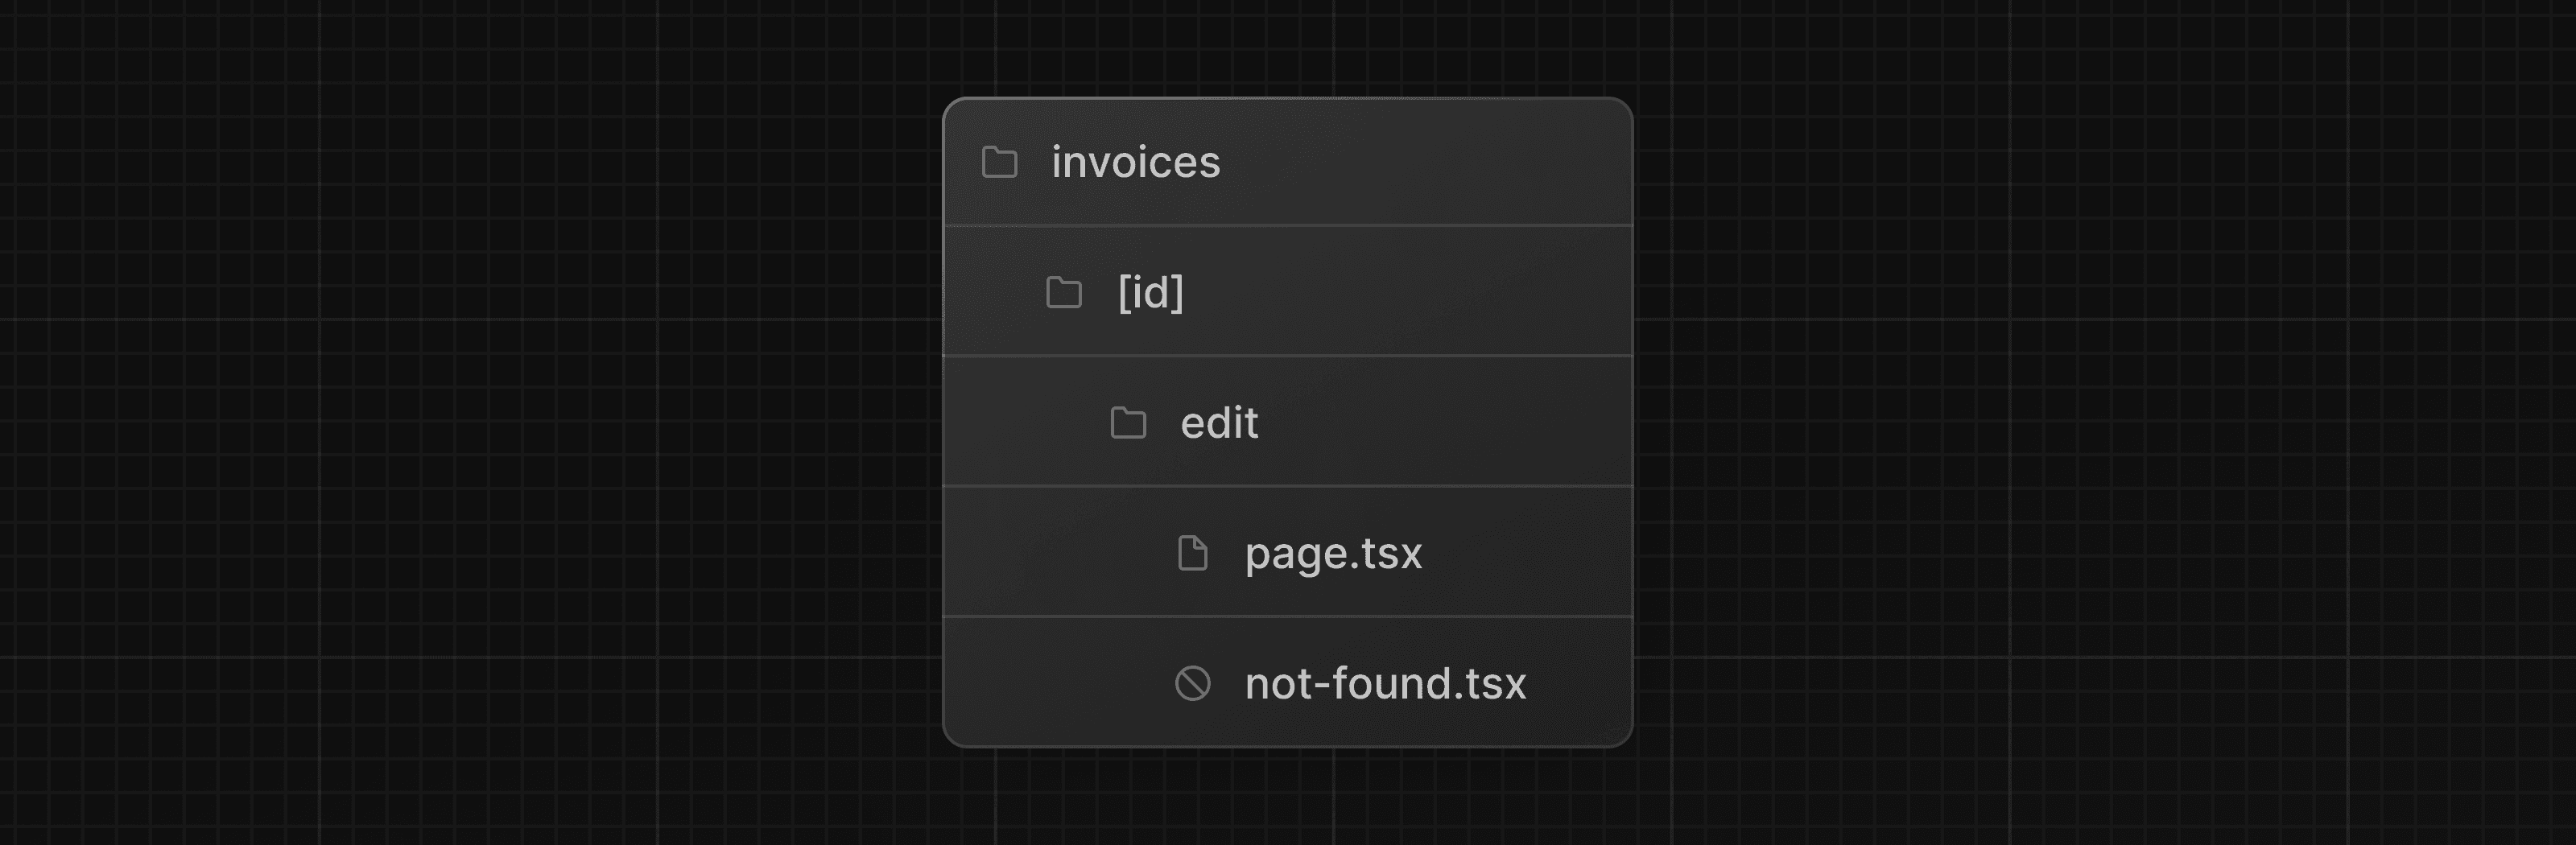 The not-found.tsx file inside the edit folder